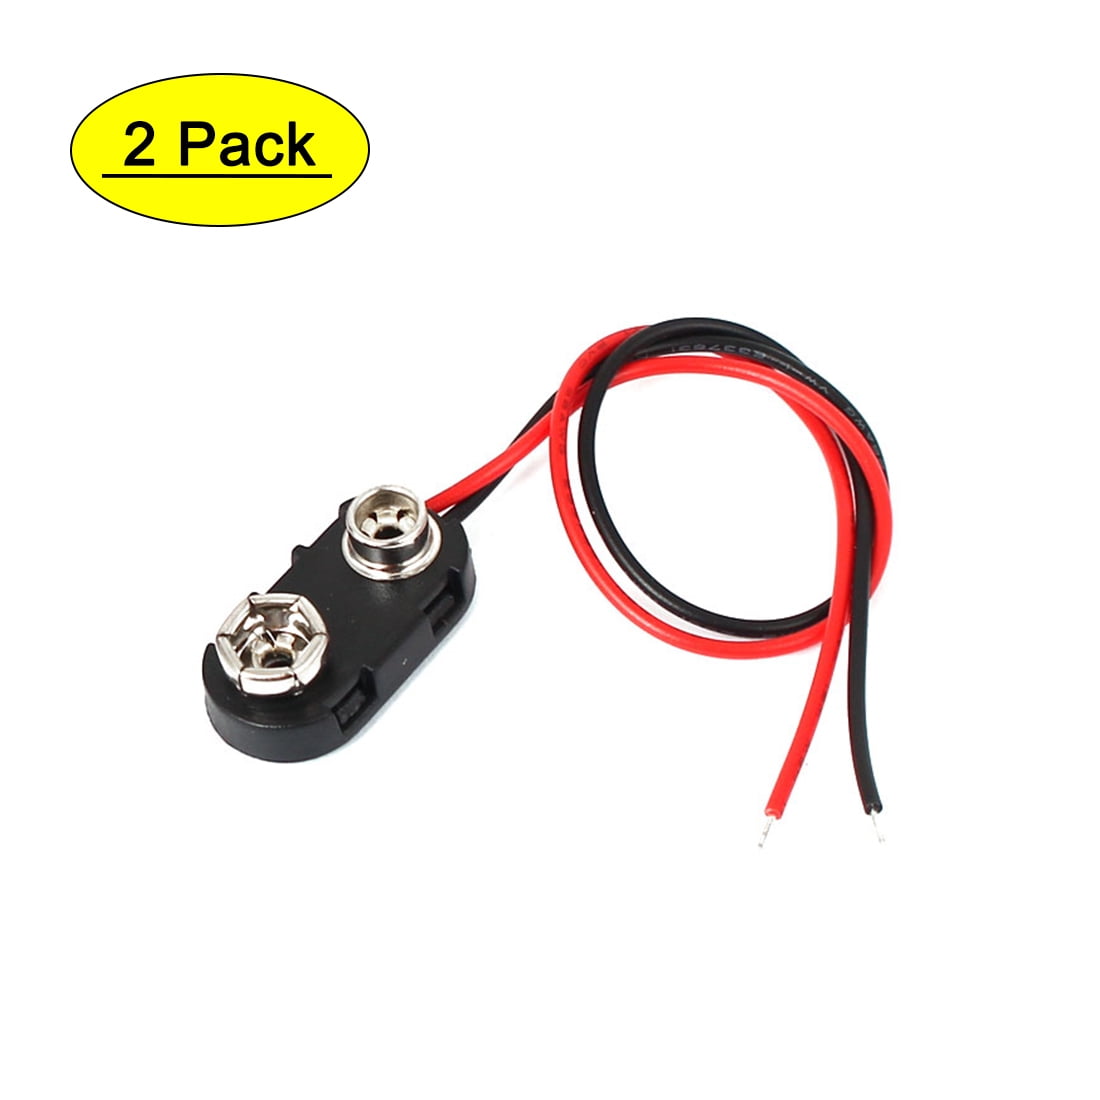 Corpco 9v Battery Snap Connector to Dual Alligator Clips Cable Pack of 3 